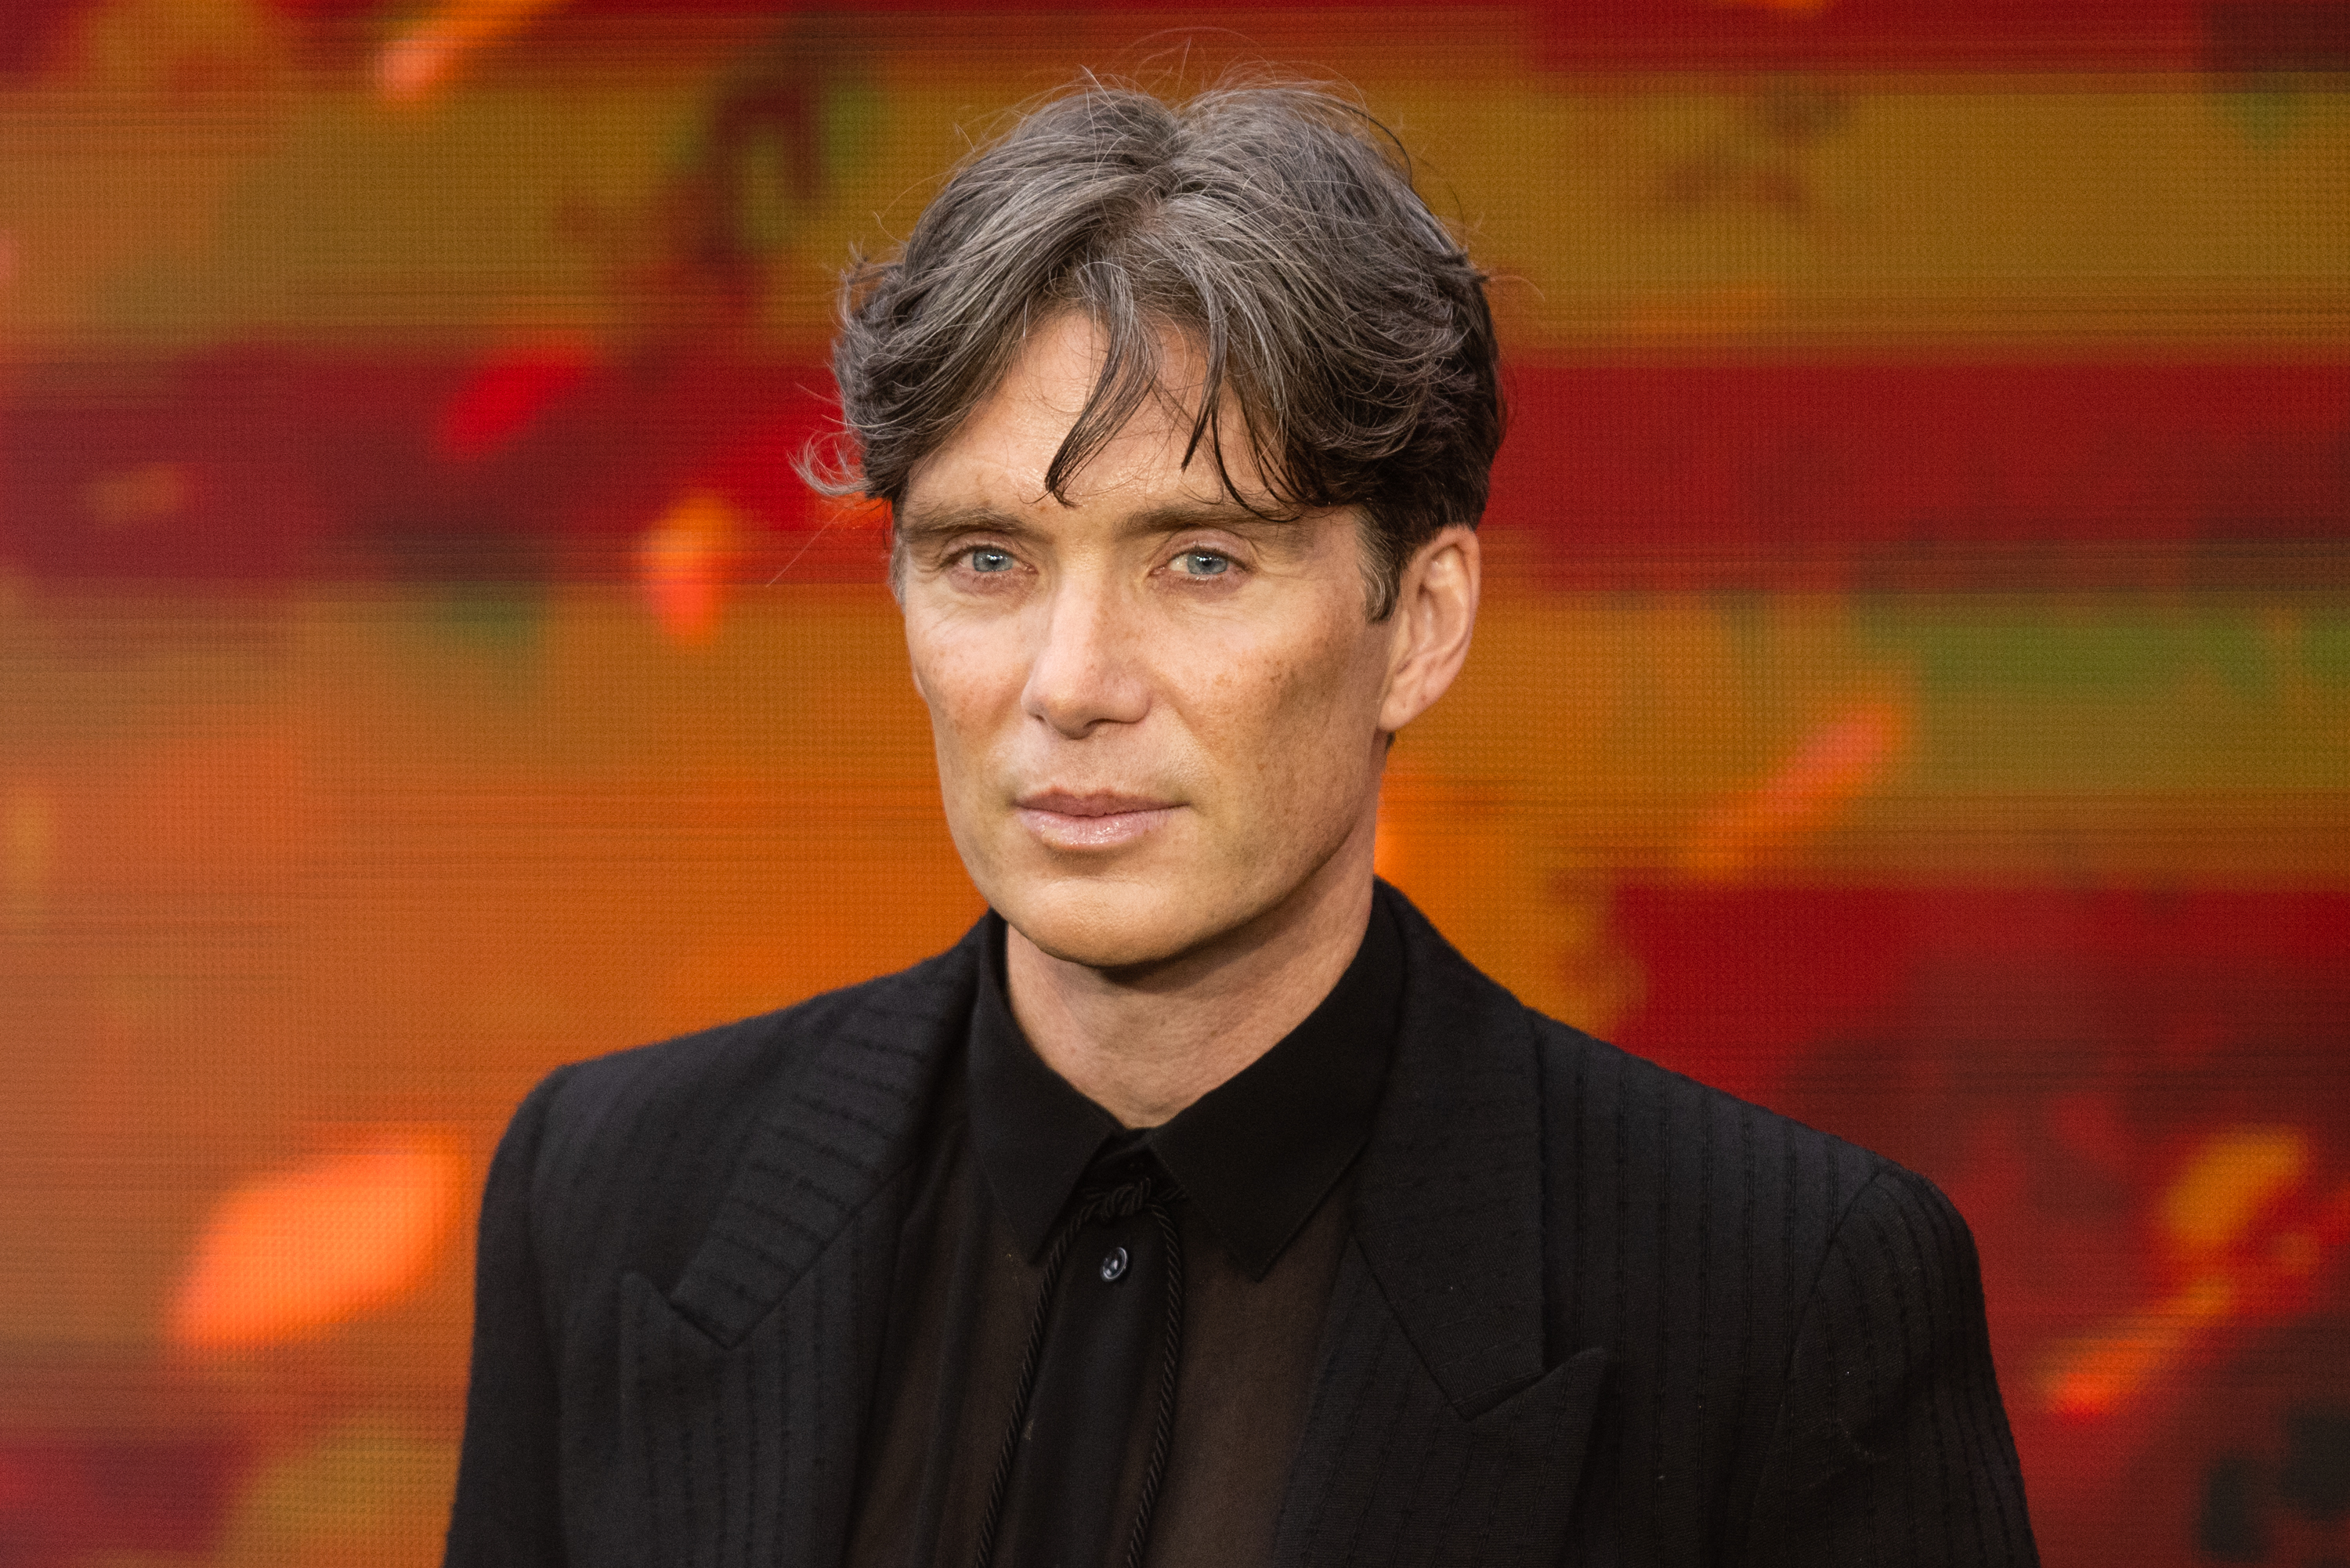 Cillian Murphy attends the "Oppenheimer" UK premiere on July 13, 2023 in London, England | Source: Getty Images